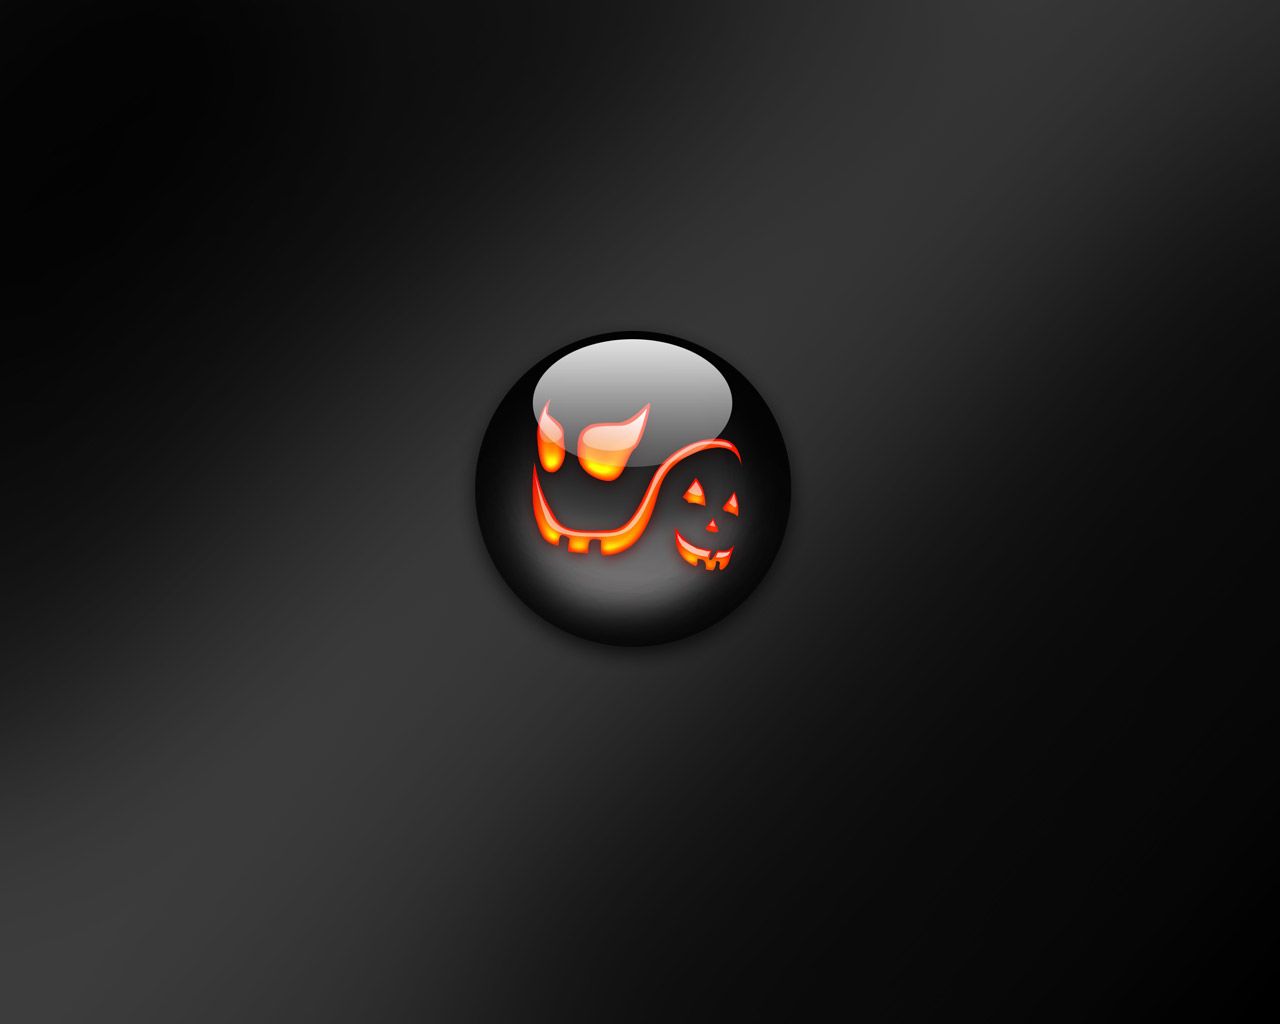 Awesome Desktop Wallpapers: Halloween Edition